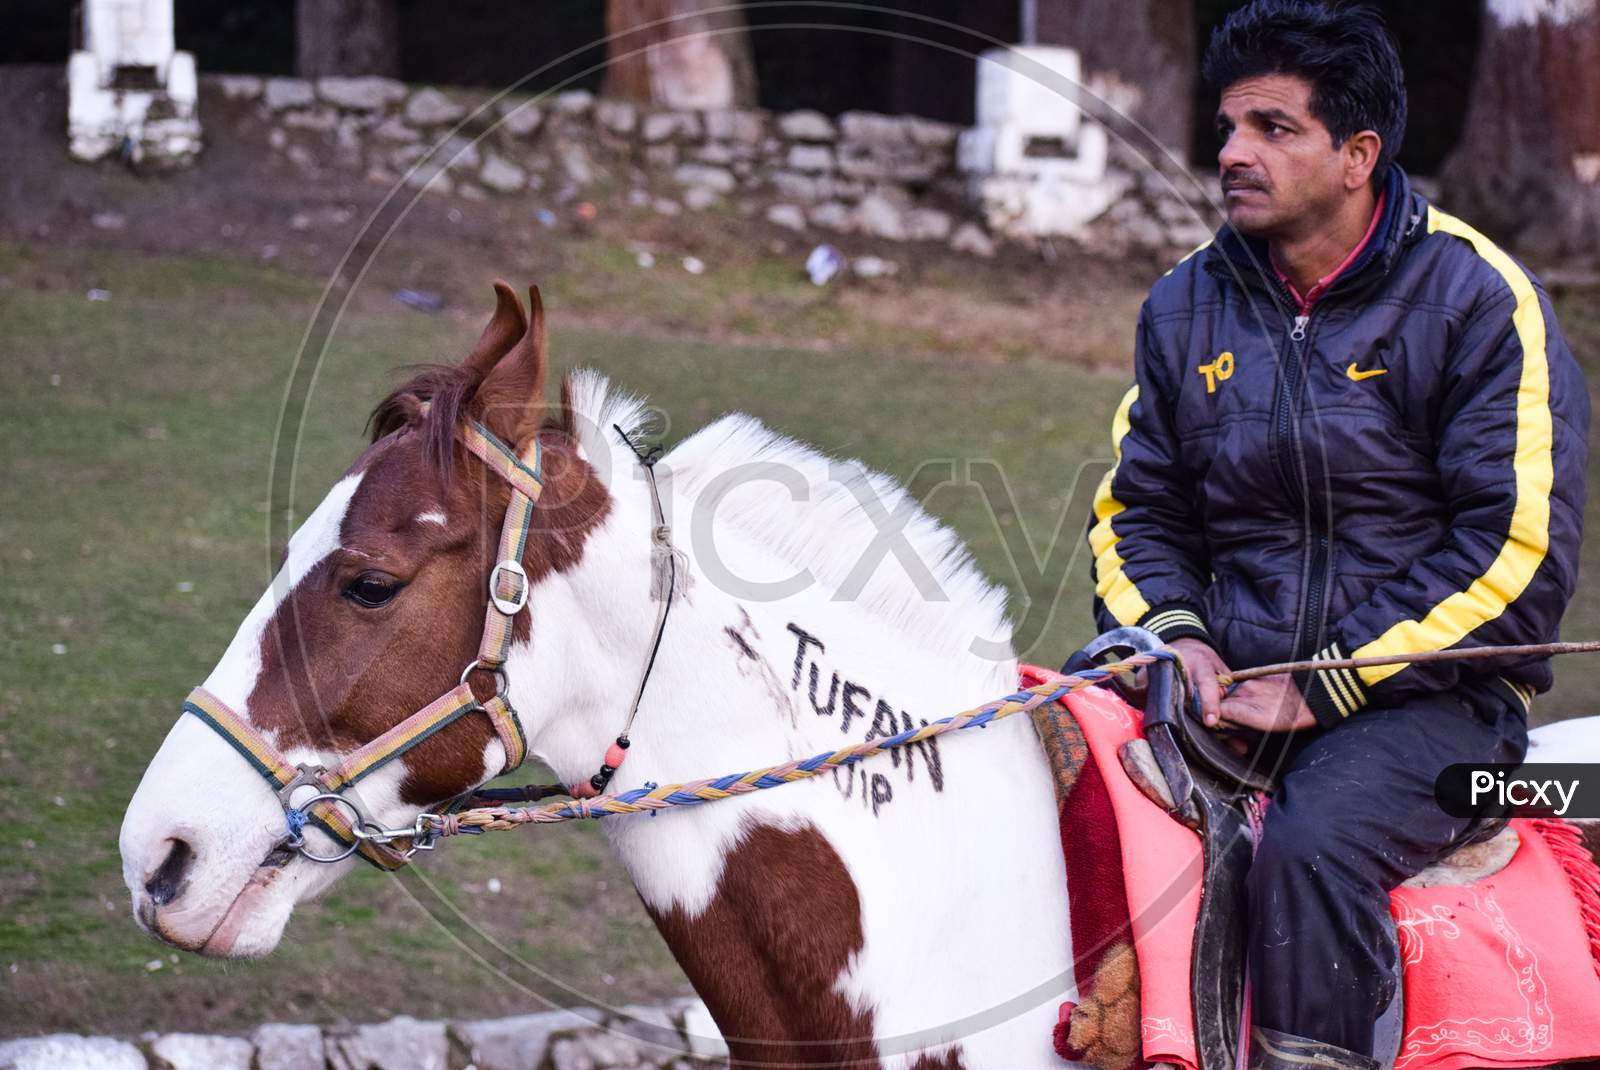 Dharamshala, 2019: Indian male horse ride sitting on white horse with saddle in a tourist location. Horse riding is a major tourist attraction in hill stations